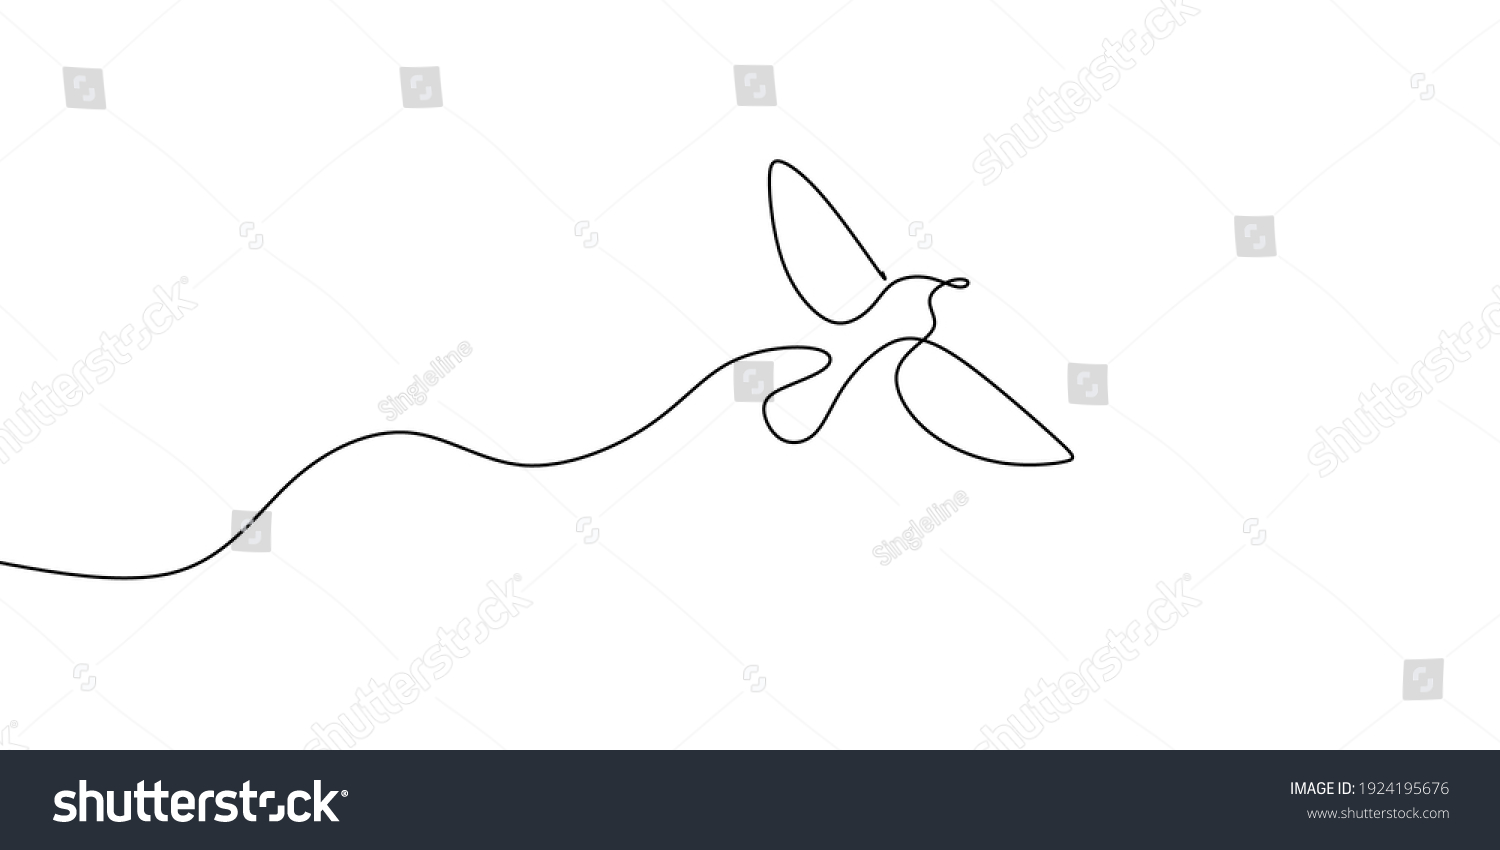 Flying bird continuous line drawing element isolated on white background for decorative element. Vector illustration of animal form in trendy outline style. #1924195676